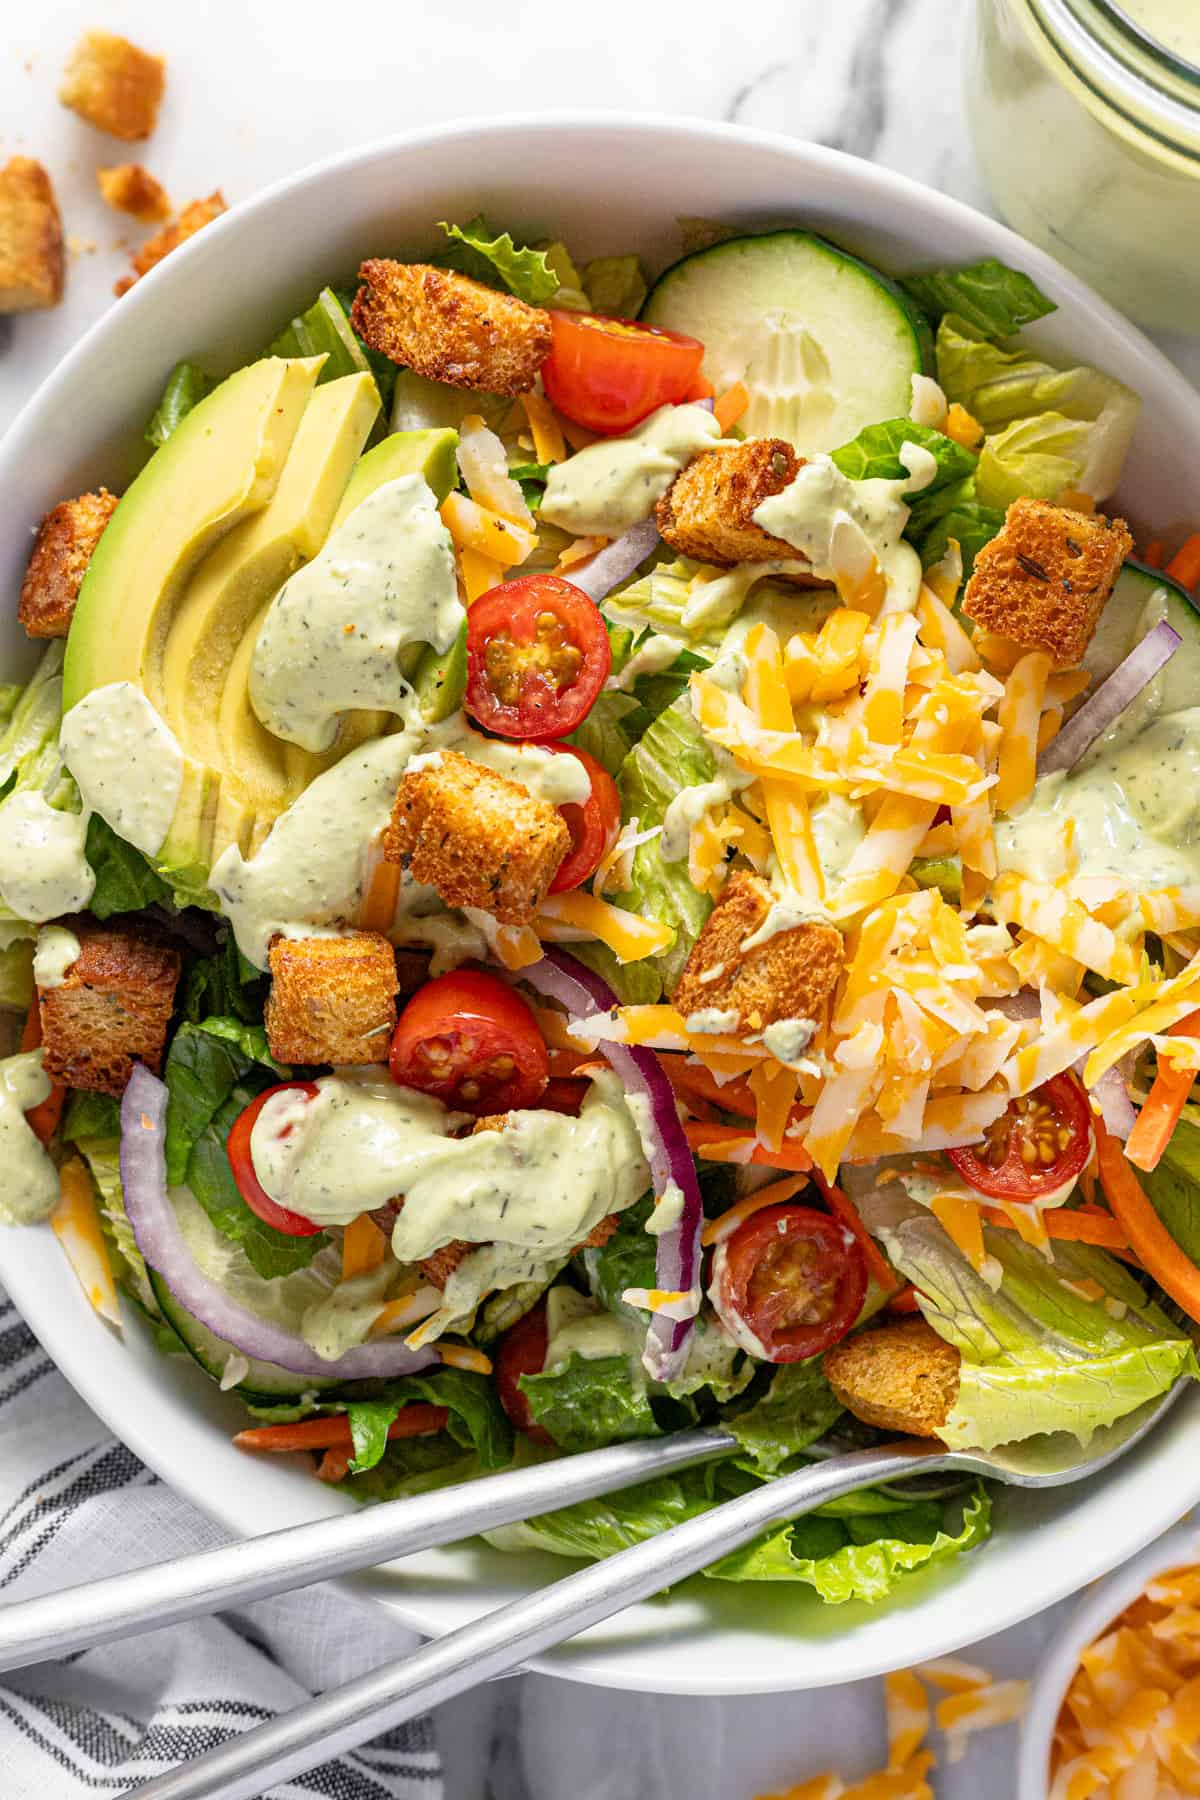 Big bowl filled with greens, veggies, cheese, and croutons, drizzled with creamy dressing.